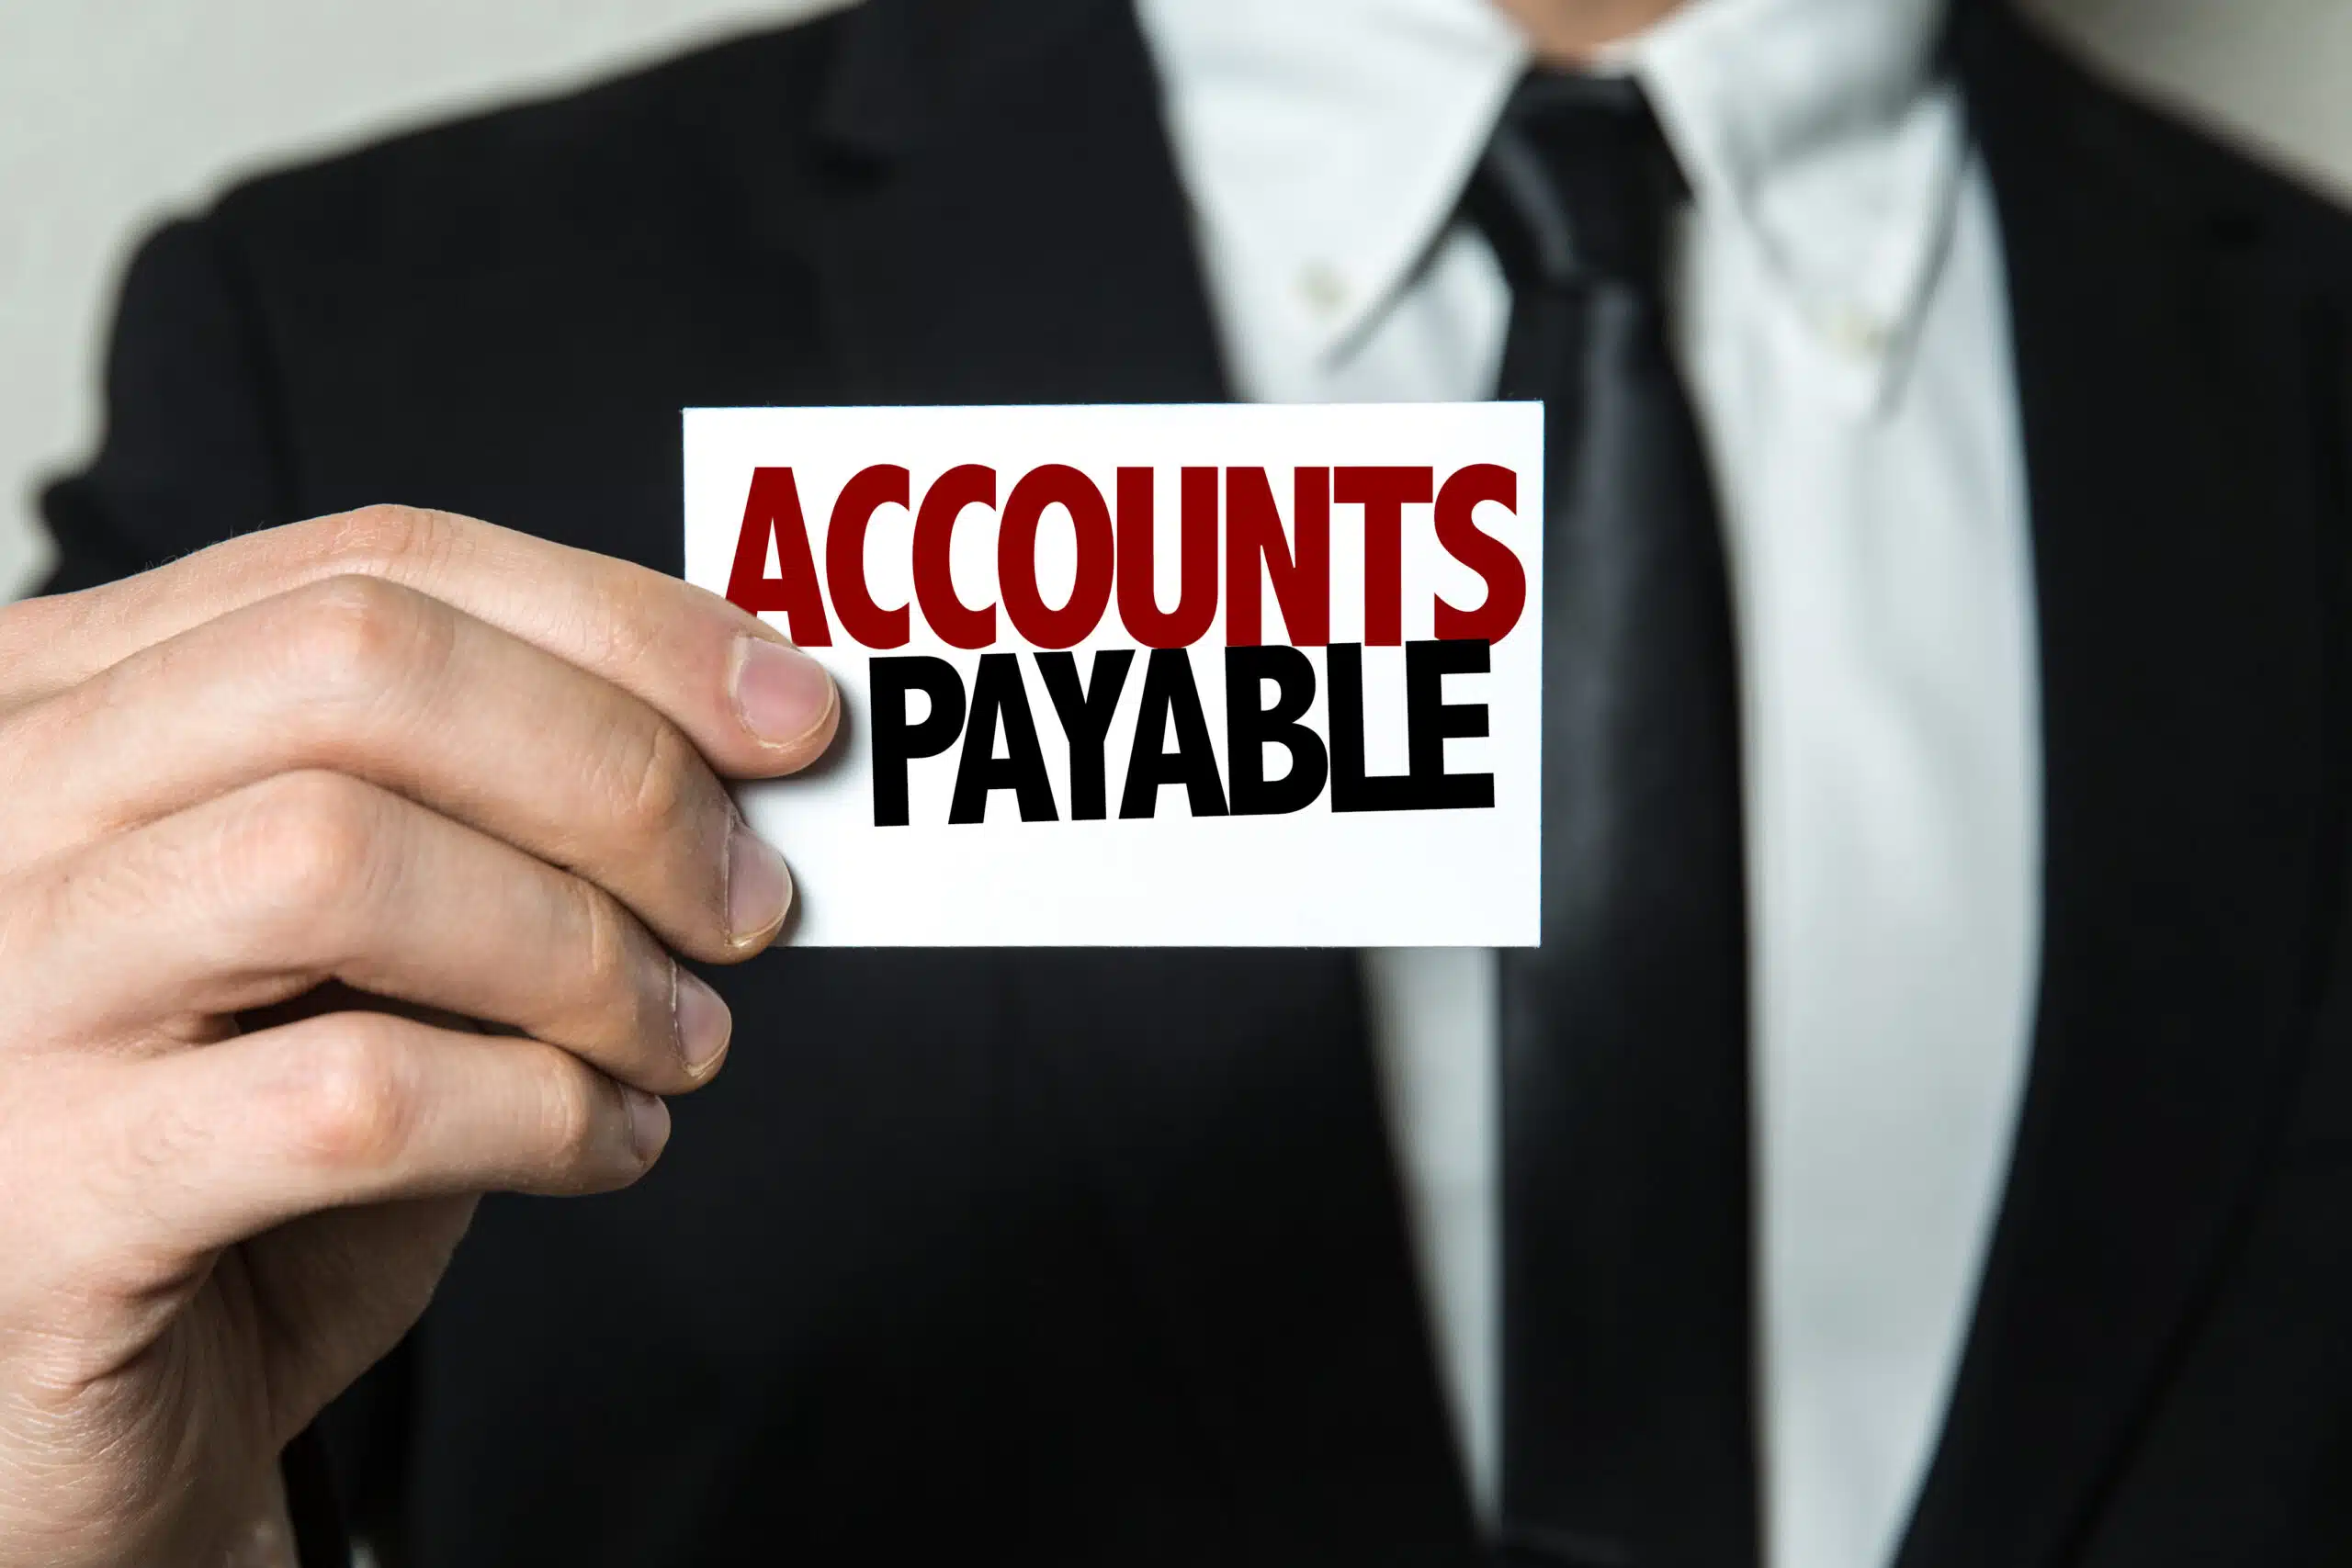 Accounts payable software helps you keep track of what bills are due and when. Here are our picks for accounts payable software for small businesses.